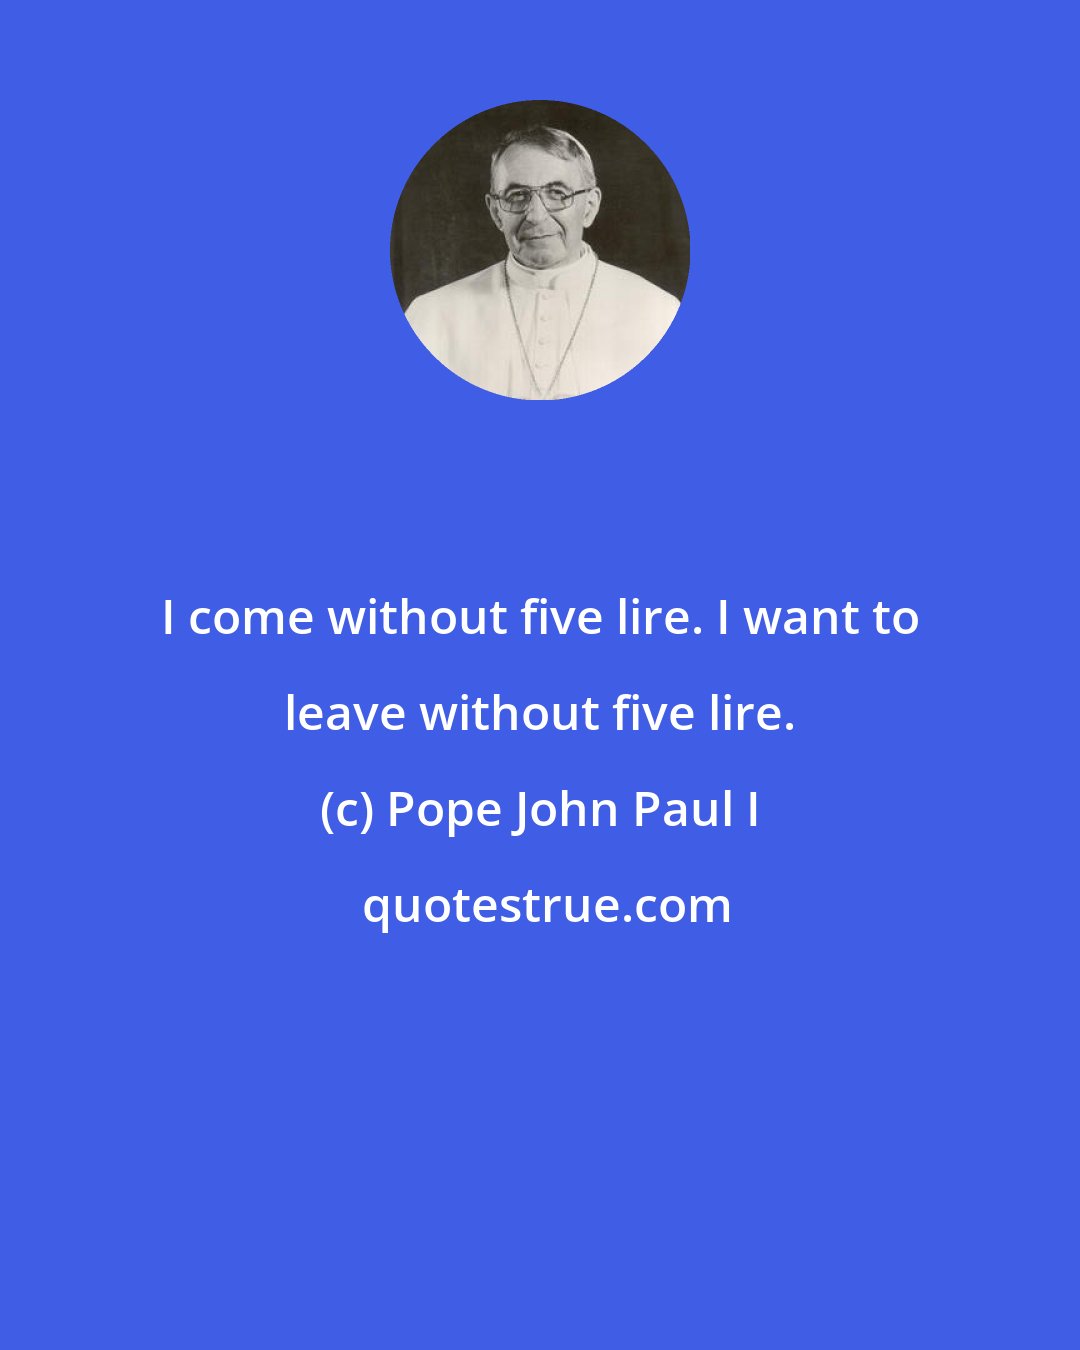 Pope John Paul I: I come without five lire. I want to leave without five lire.